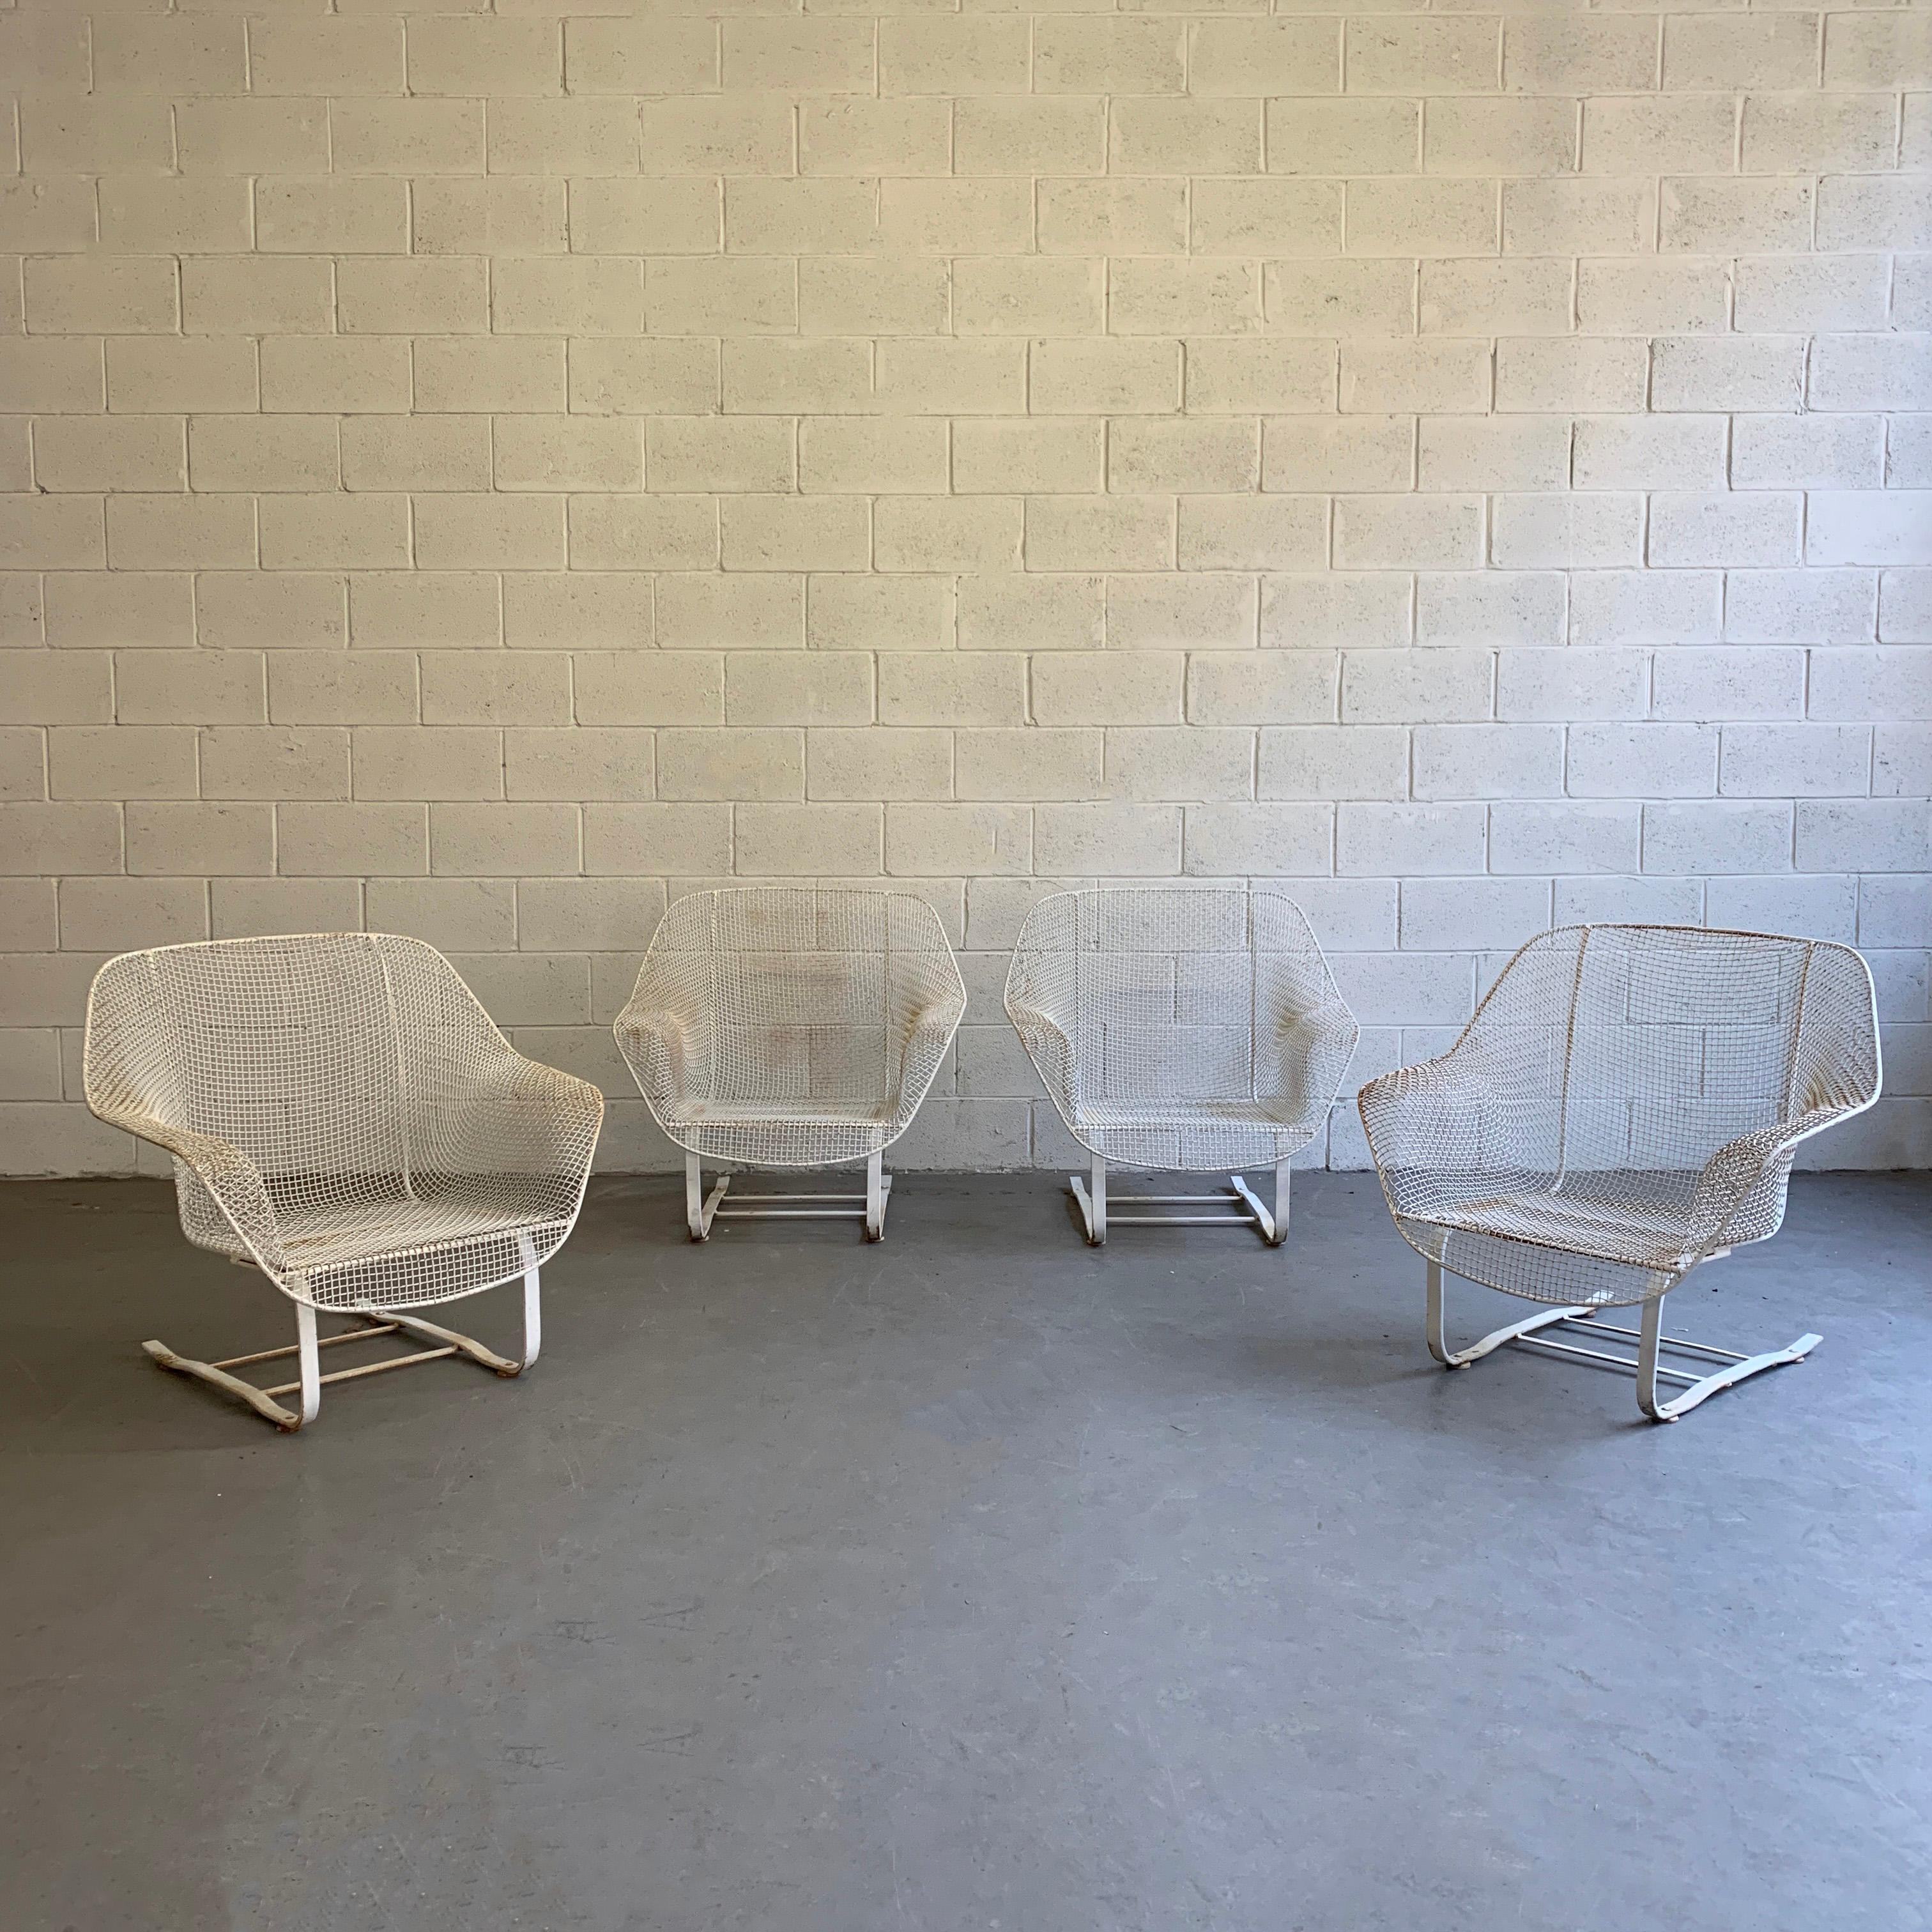 Pair of Mid-Century Modern, outdoor, patio lounge chairs by Russell Woodard, Sculptura feature low, wide wrought iron mesh frames with cantilevered steel bases that gently bounce with original cushions. Sold as a pair, two pairs are available.